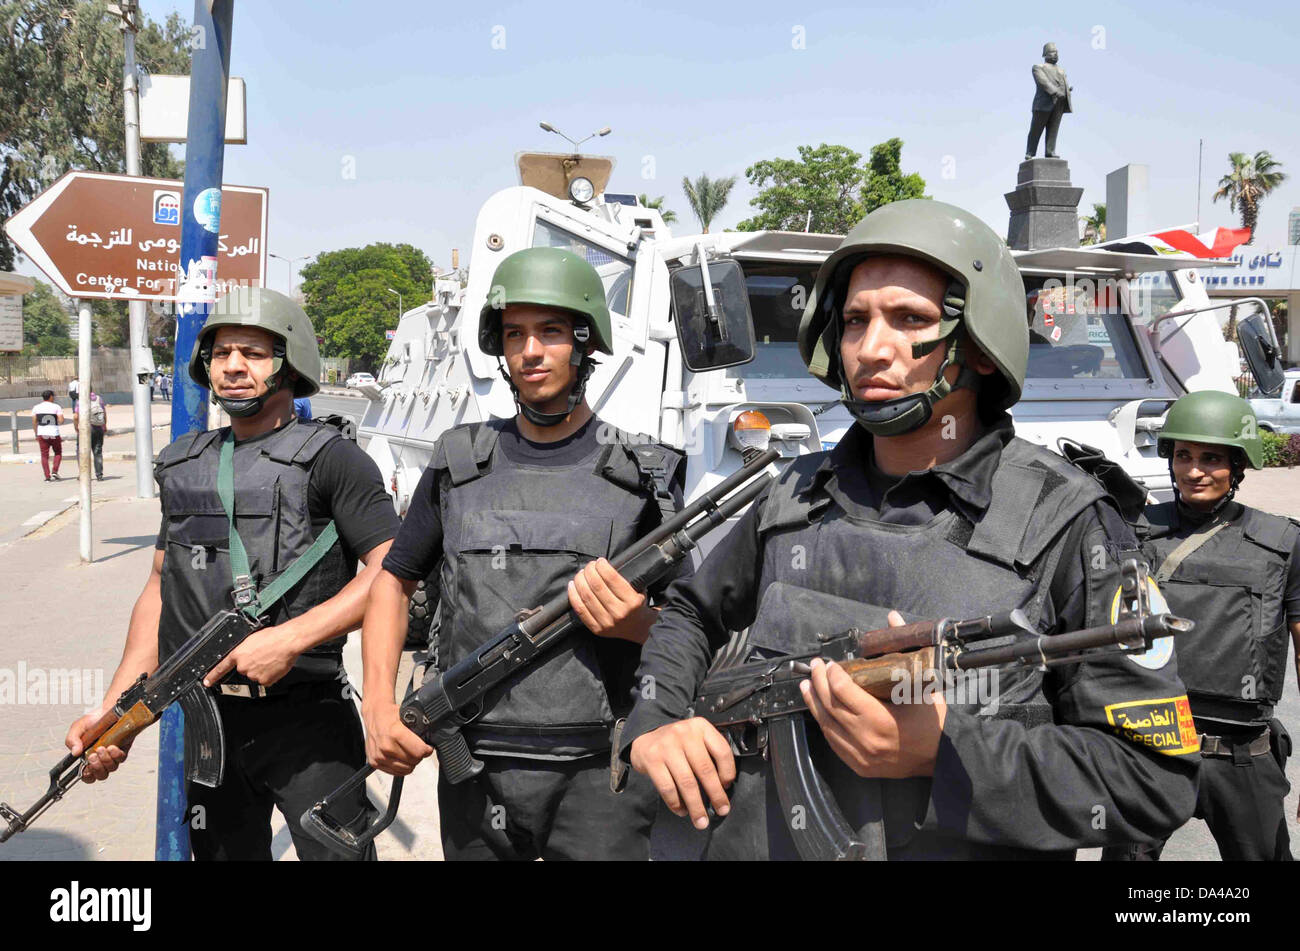 Cairo, Cairo, Egypt. 3rd July, 2013. Egyptian police special forces ...